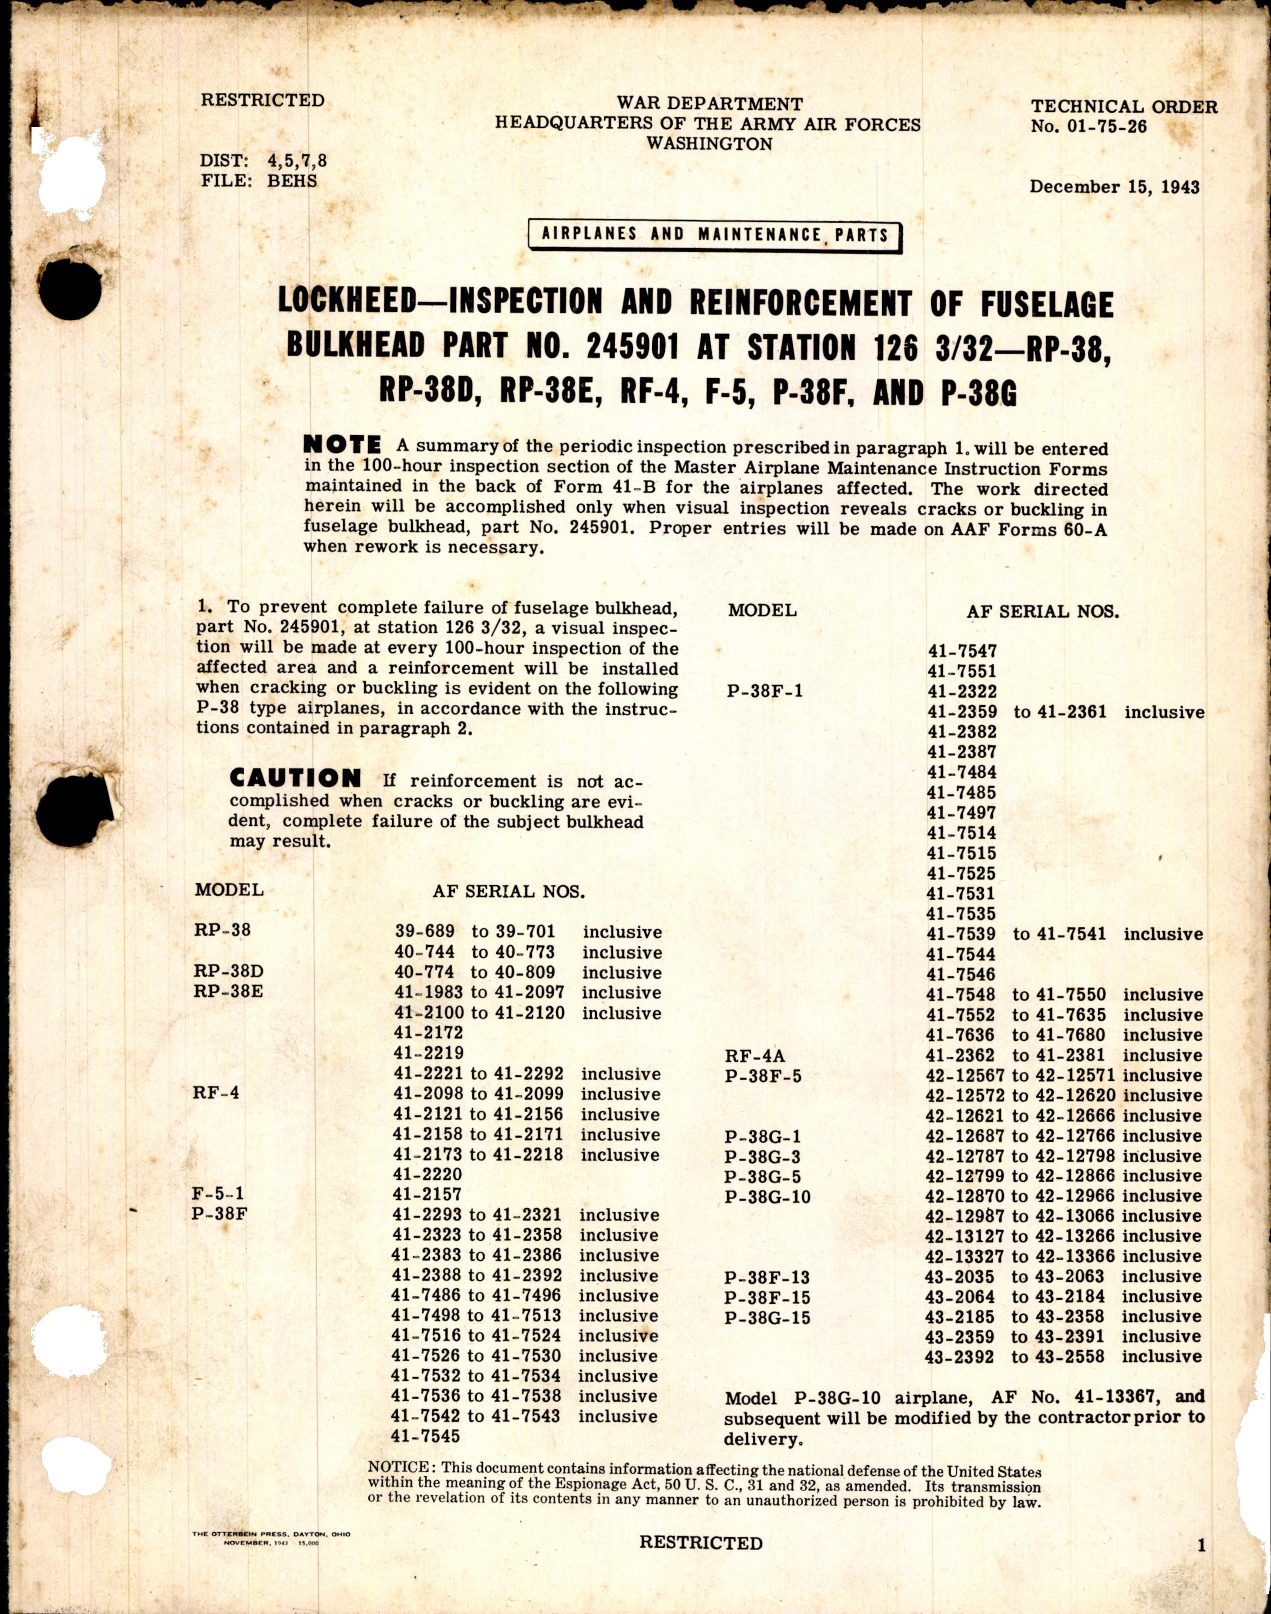 Sample page 1 from AirCorps Library document: Inspection and Reinforcement of Fuselage Bulkhead Part No. 245901 at Station 126 3/32 for RP-38